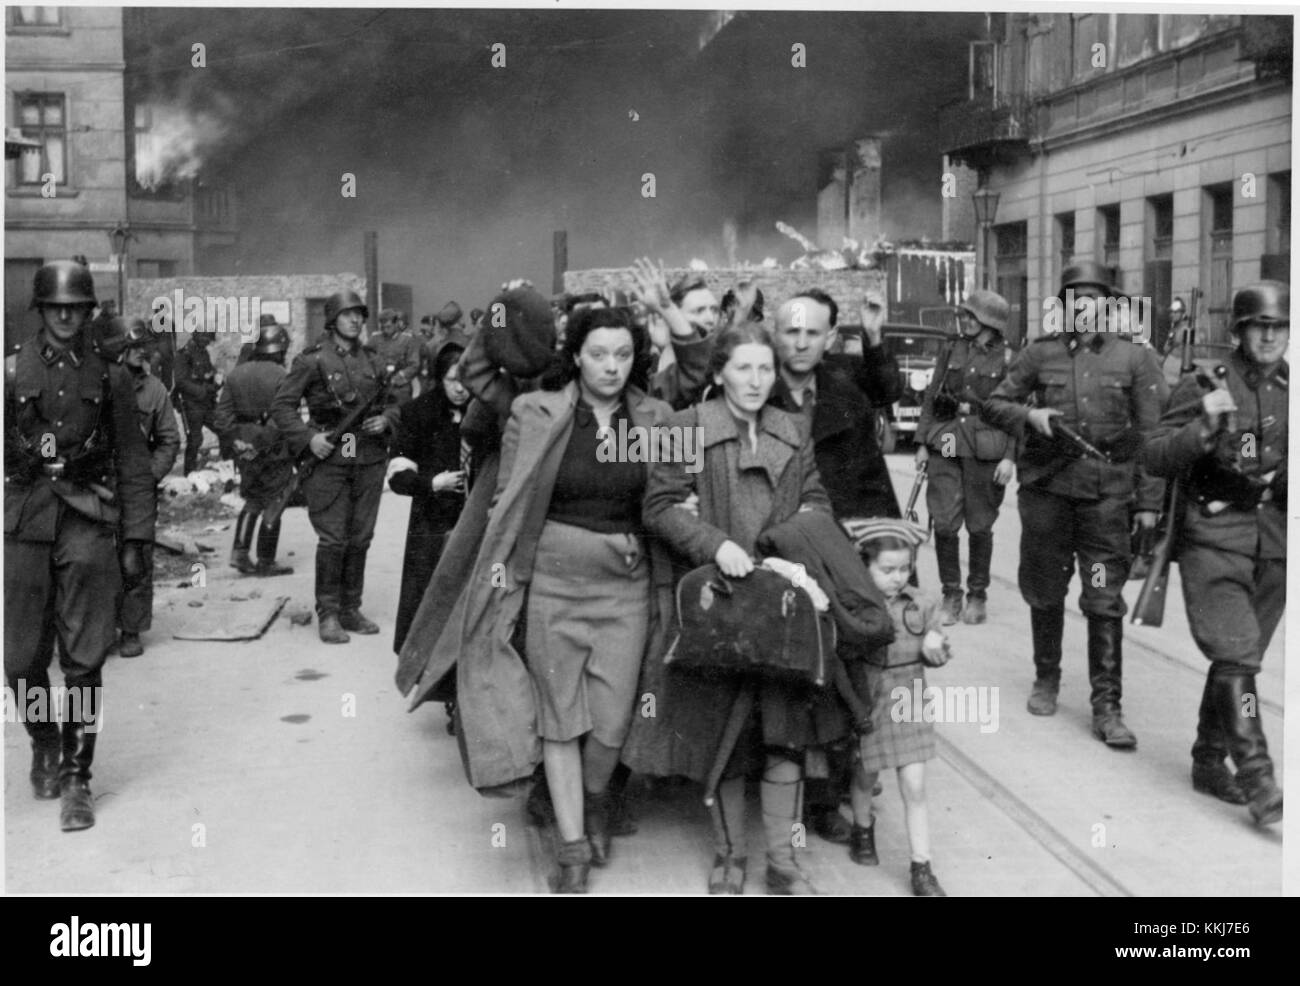 Stroop Report 2/4 Record Group 038 United States Counsel for the Prosecution of Axis Criminality; United States Exhibits, 1933-46 HMS Asset Id: HF1-88454435 ReDiscovery Number: 06315 Stroop Report - Warsaw Ghetto Uprising 10 Stock Photo